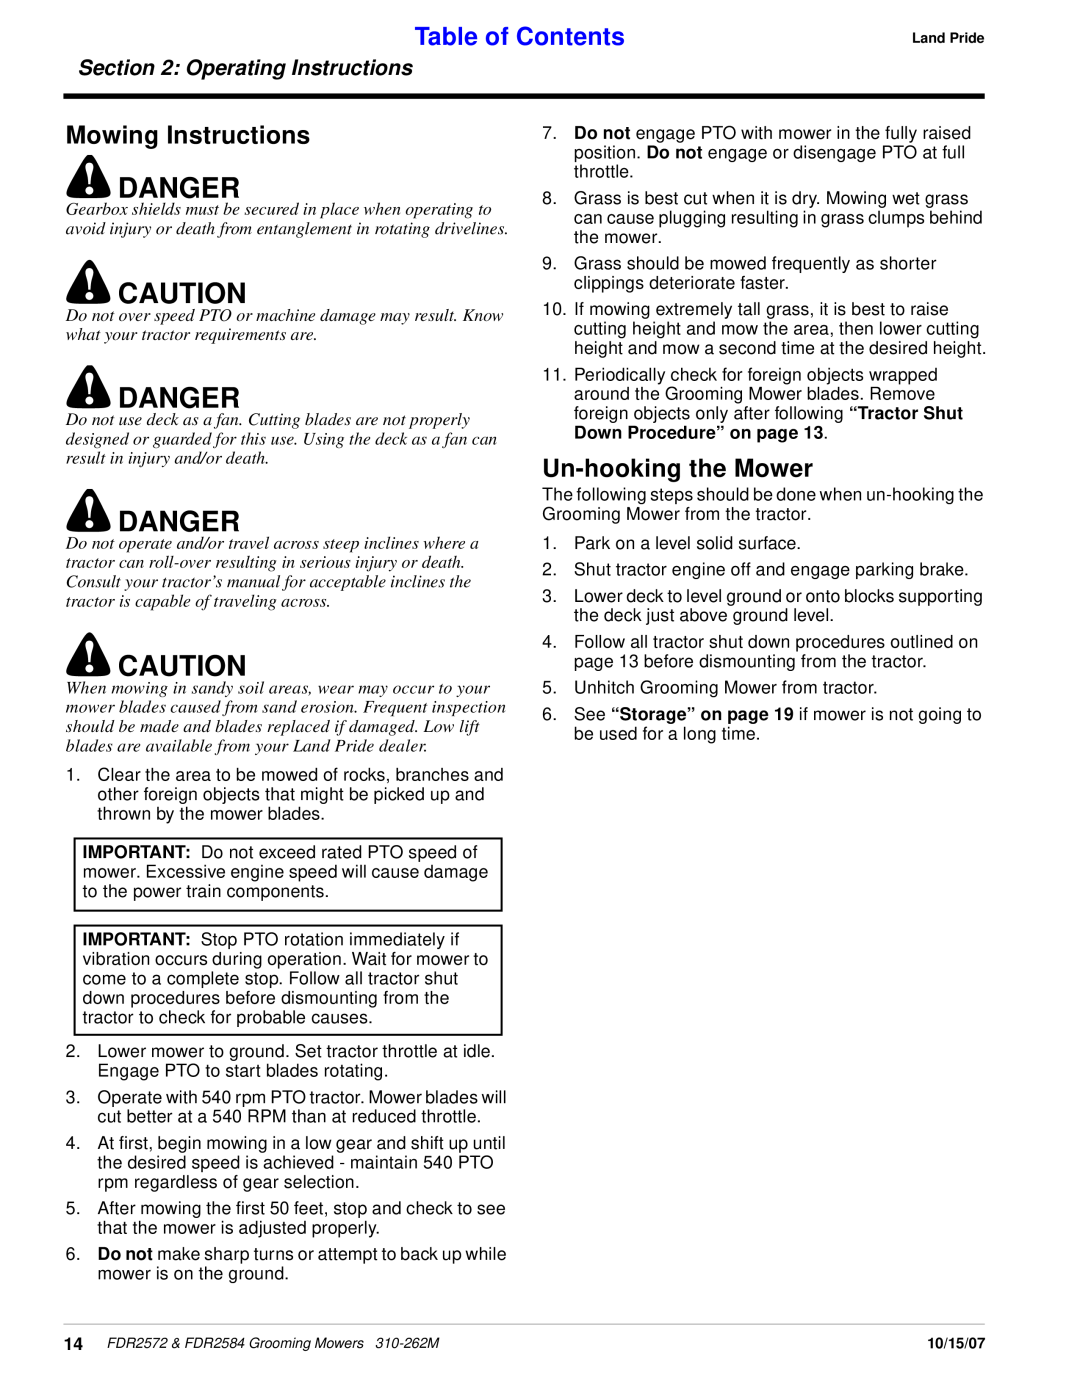 Land Pride FDR2572, FDR2584 Danger, Mowing Instructions, Un-hookingthe Mower, Table of Contents, Operating Instructions 